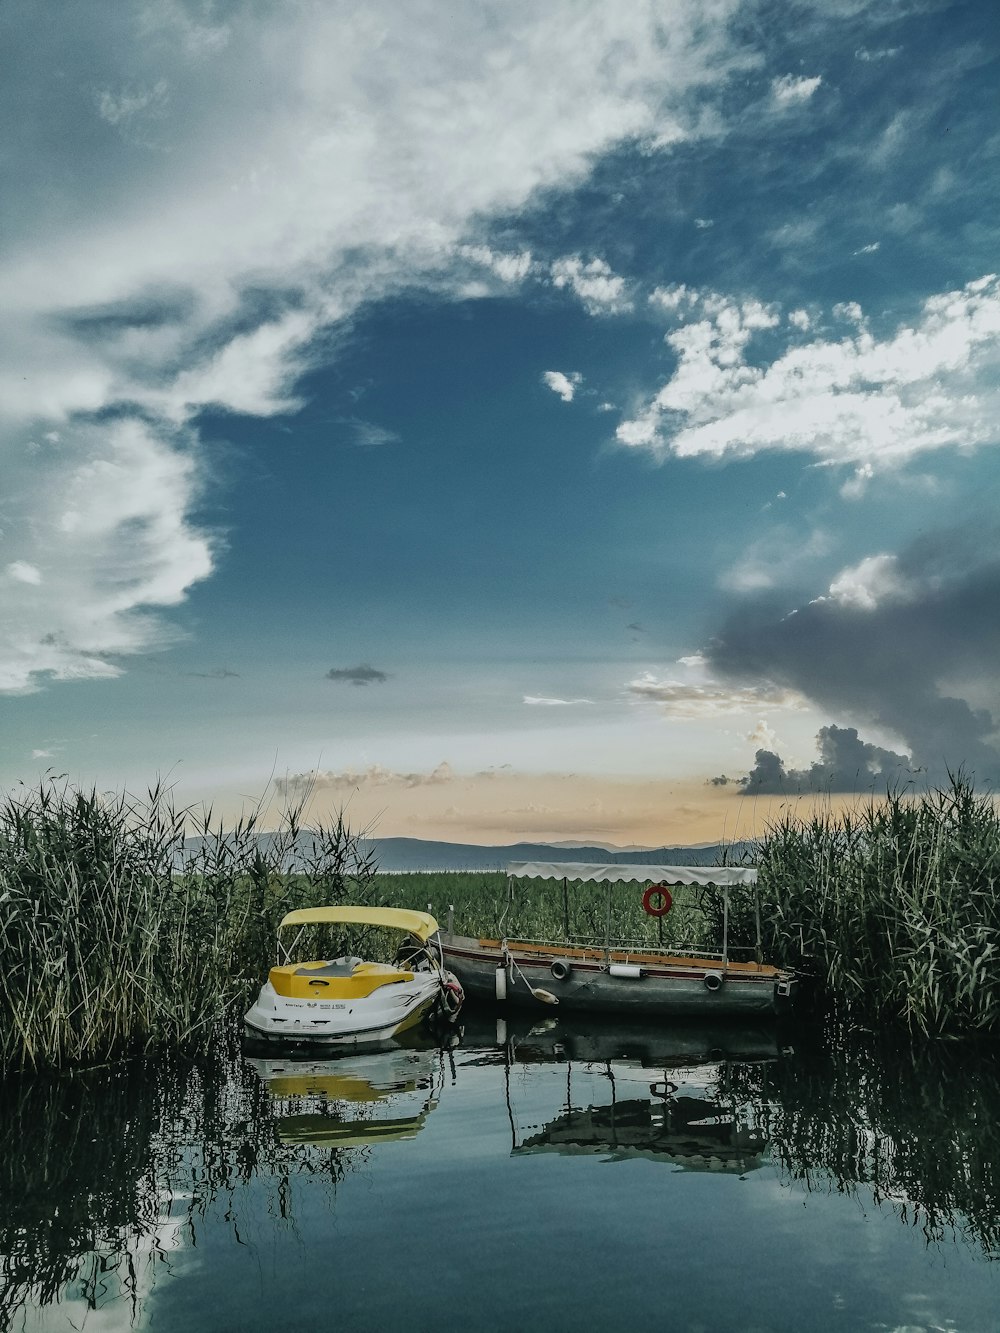 a boat sitting in a body of water next to tall grass